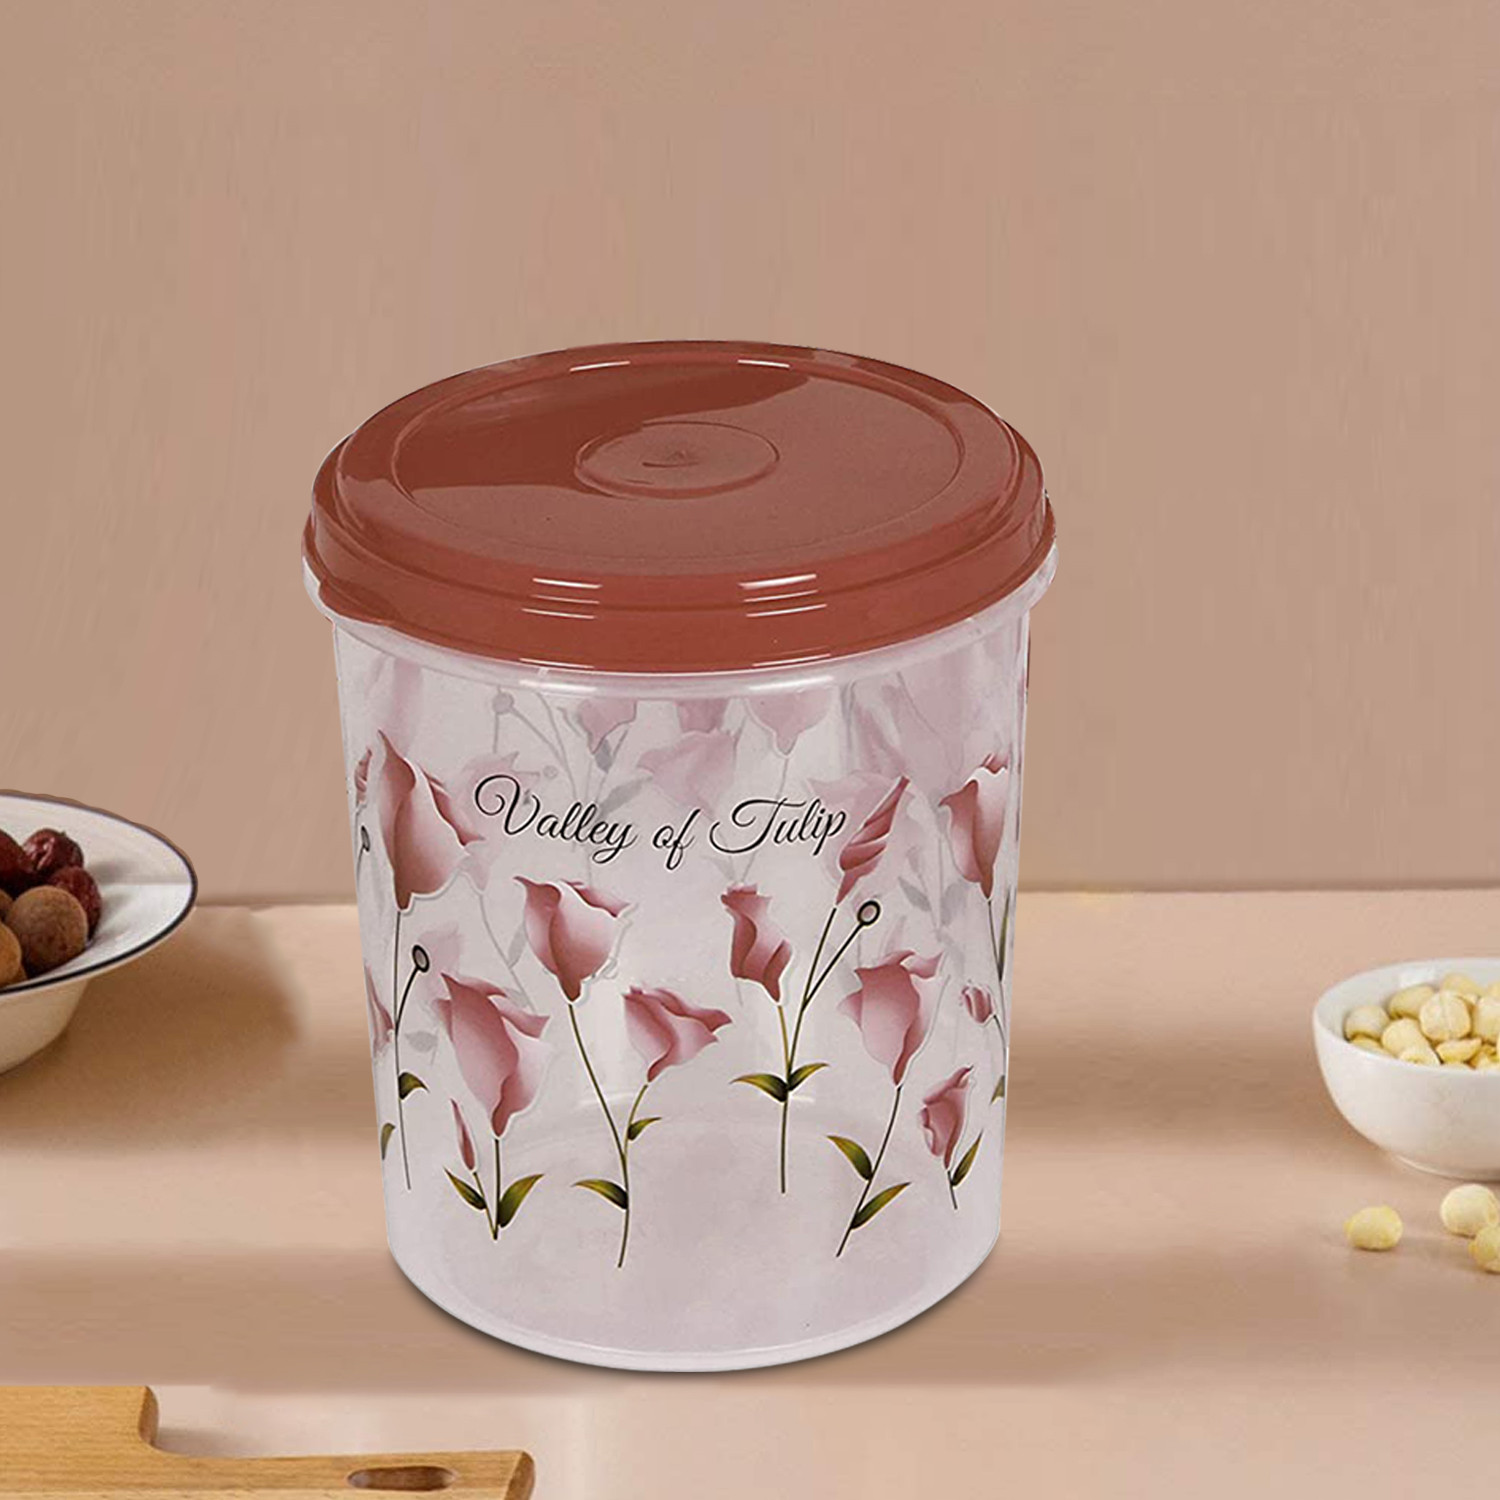 Kuber Industries Plastic Container|Container For Kitchen Storage Set|Air Tight Container|Tulip Printed 5 Litre,7 Litre,10 Litre Containers|Set of 3 (Brown)